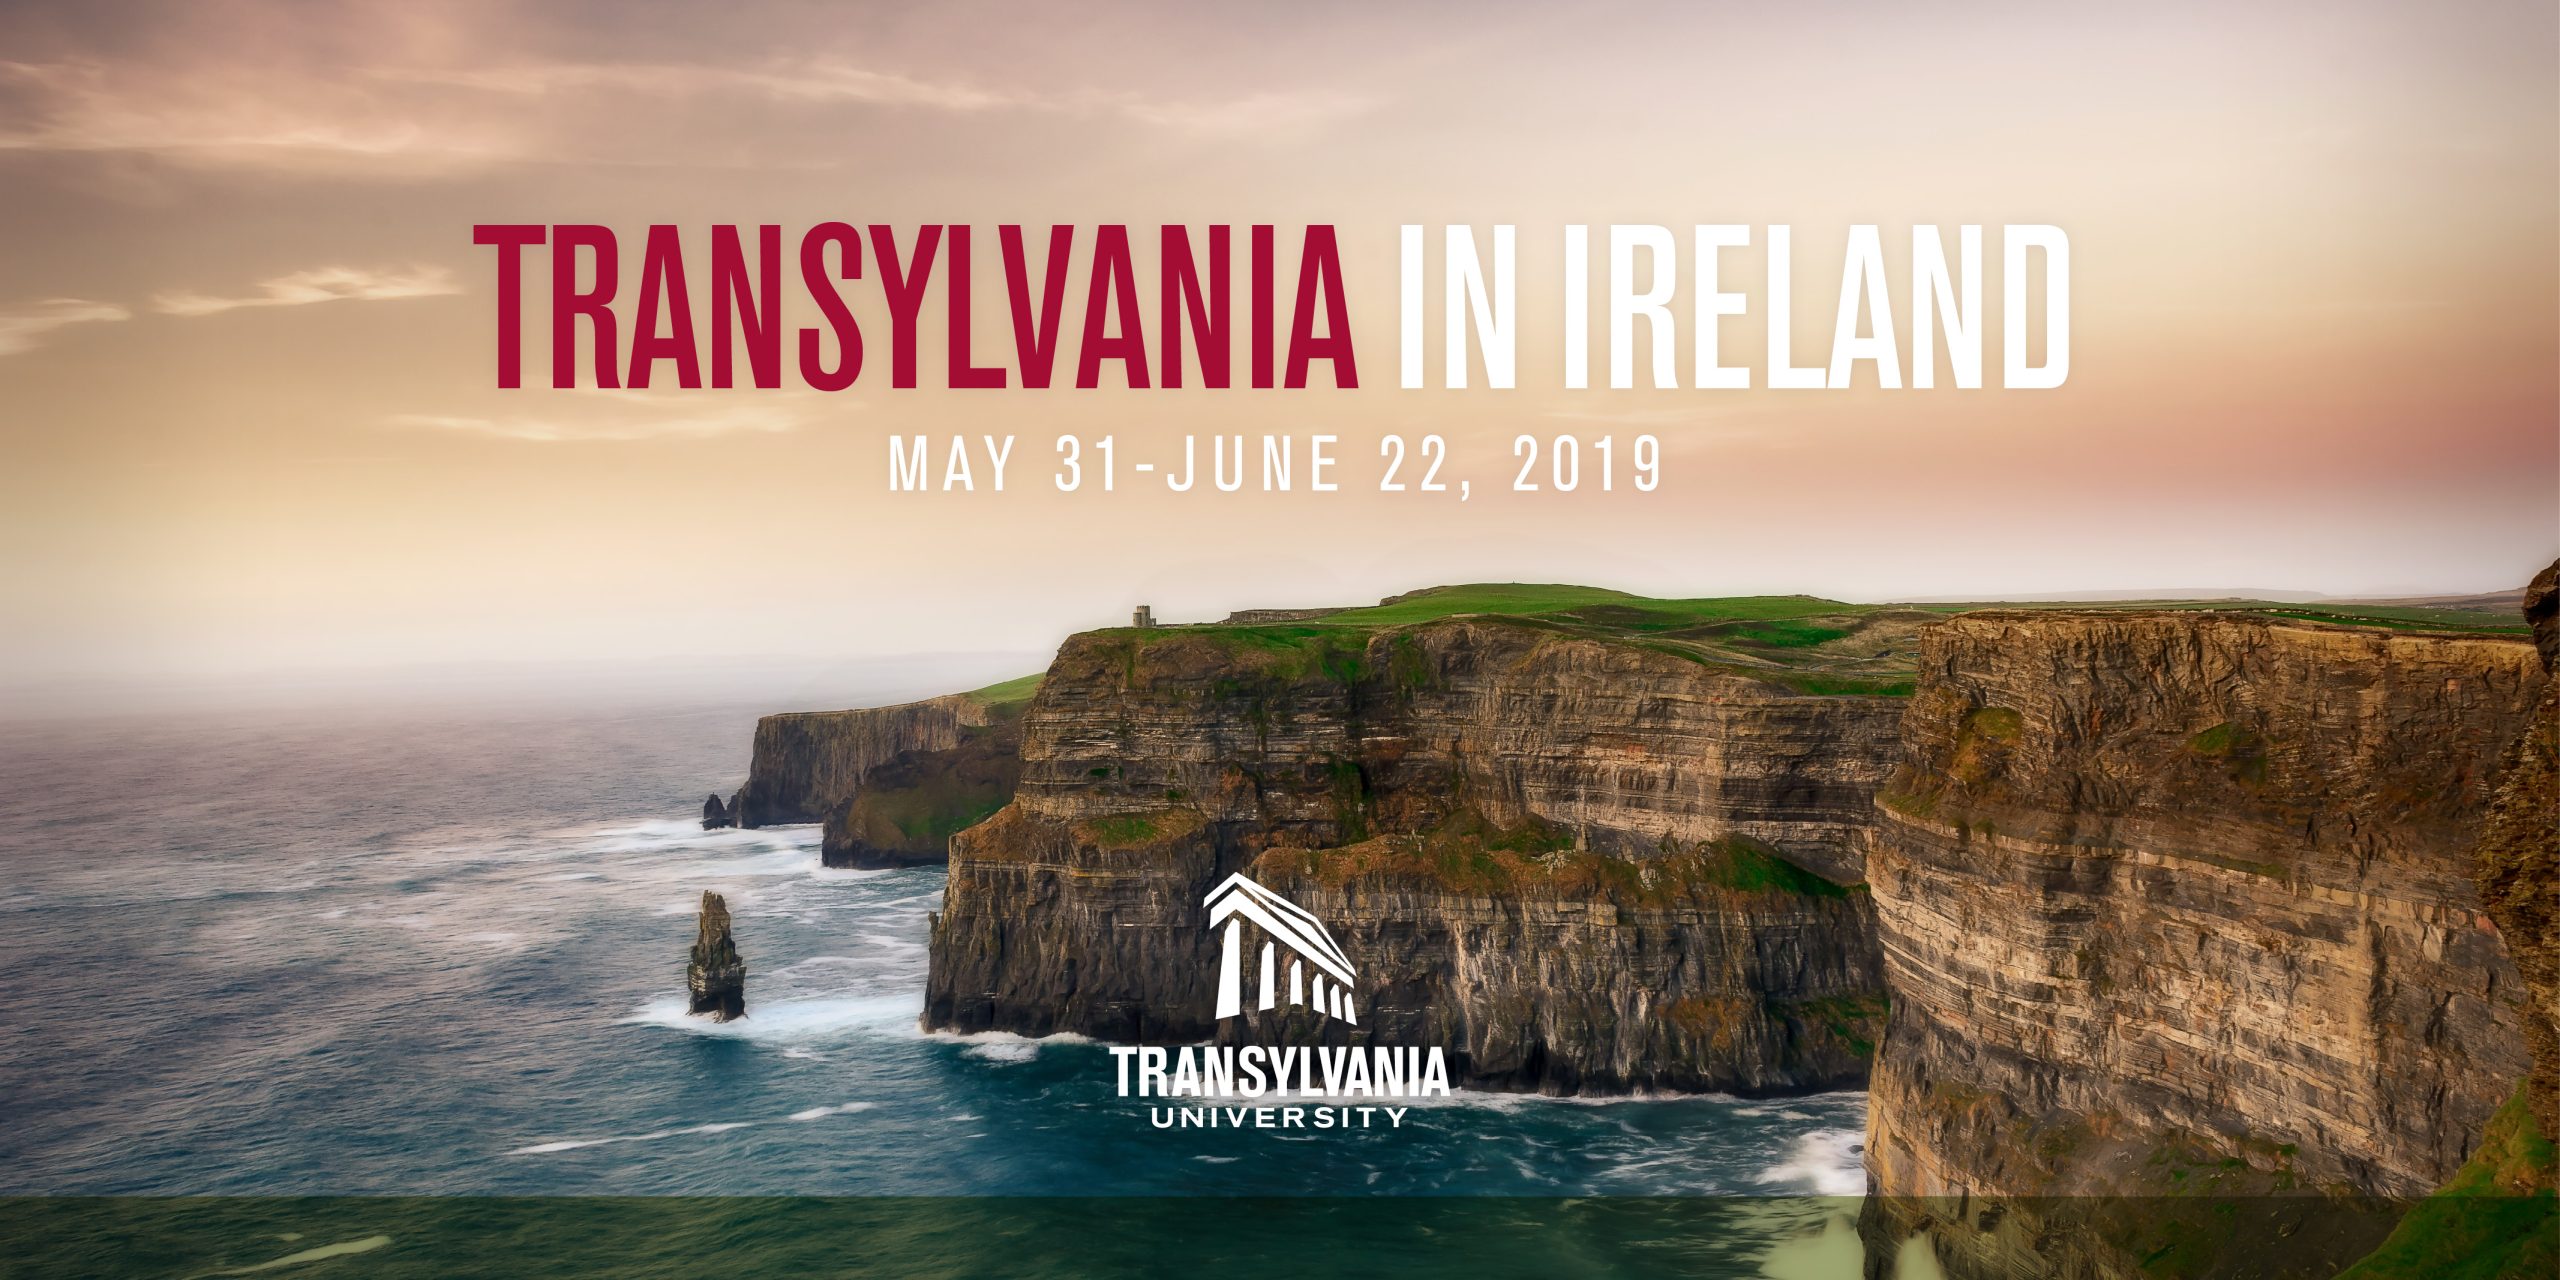 Transylvania launches new study abroad summer course in Ireland open to all college students